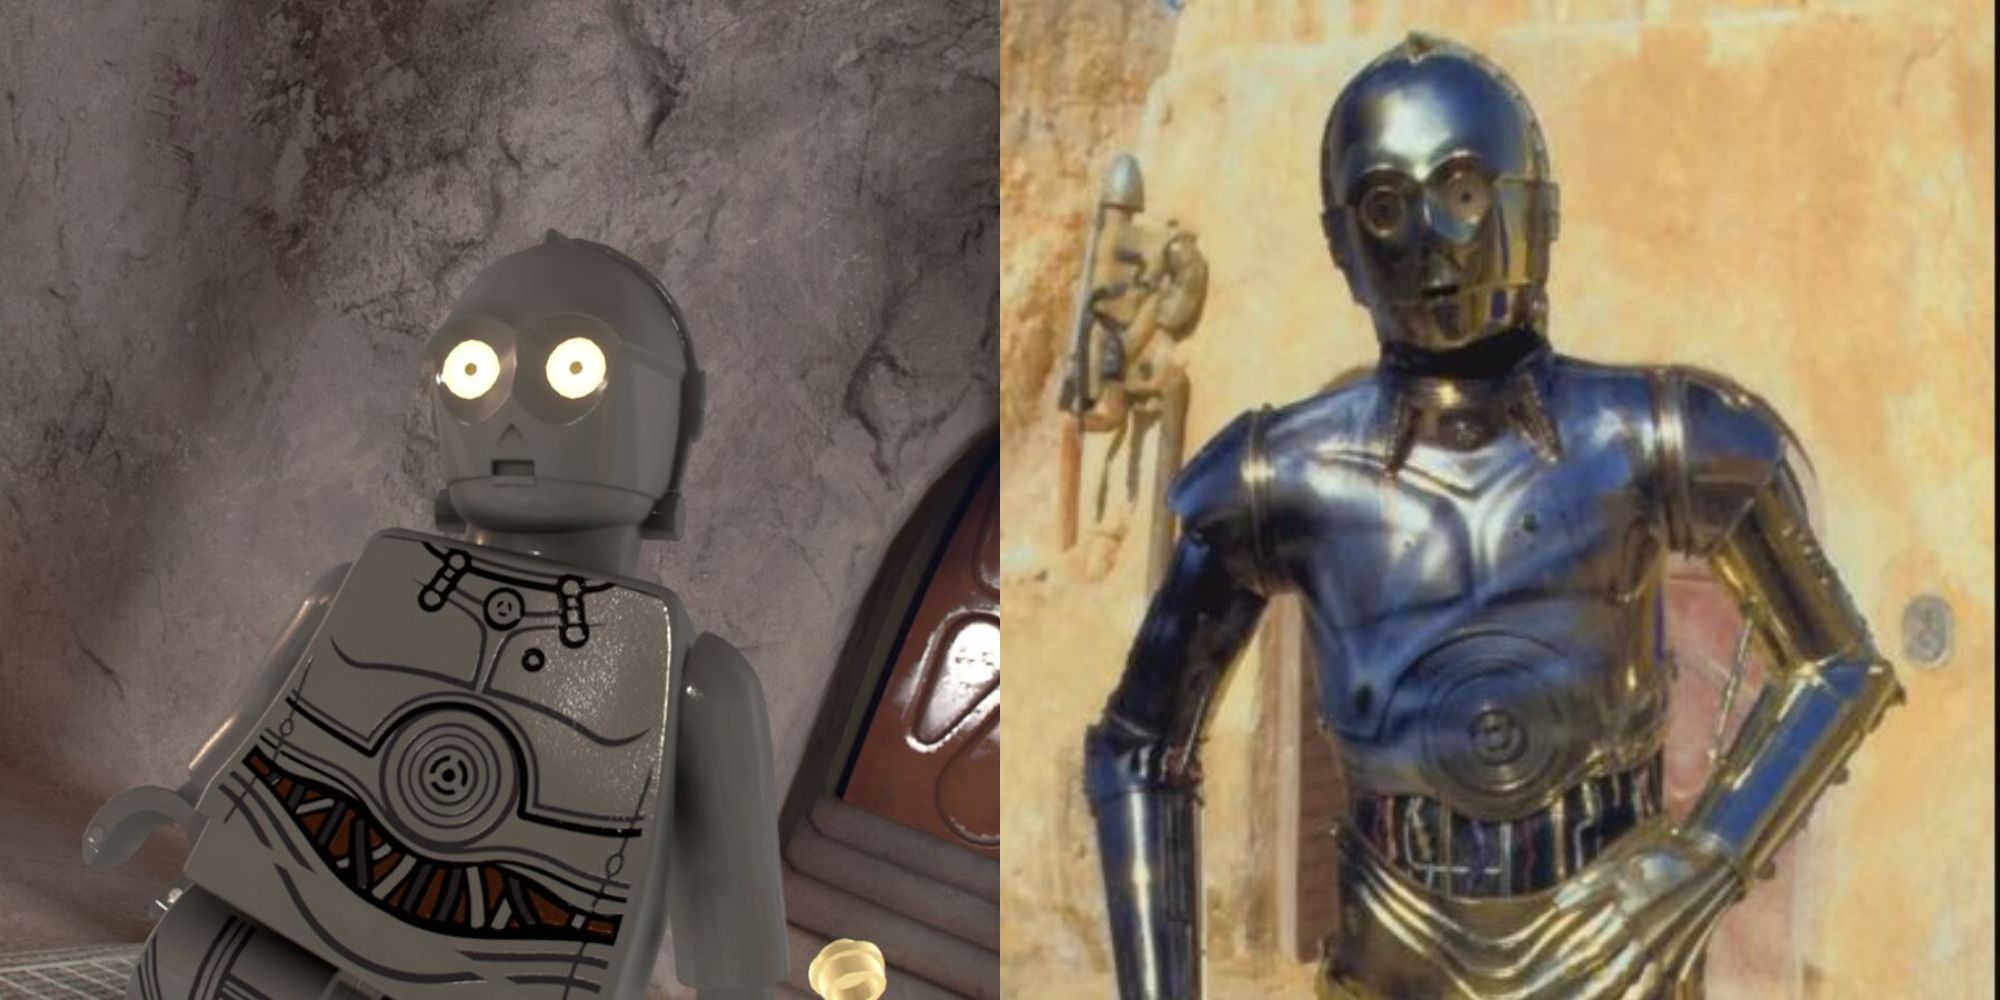 Side-by-Side Picture of Nobot and his LEGO counterpart